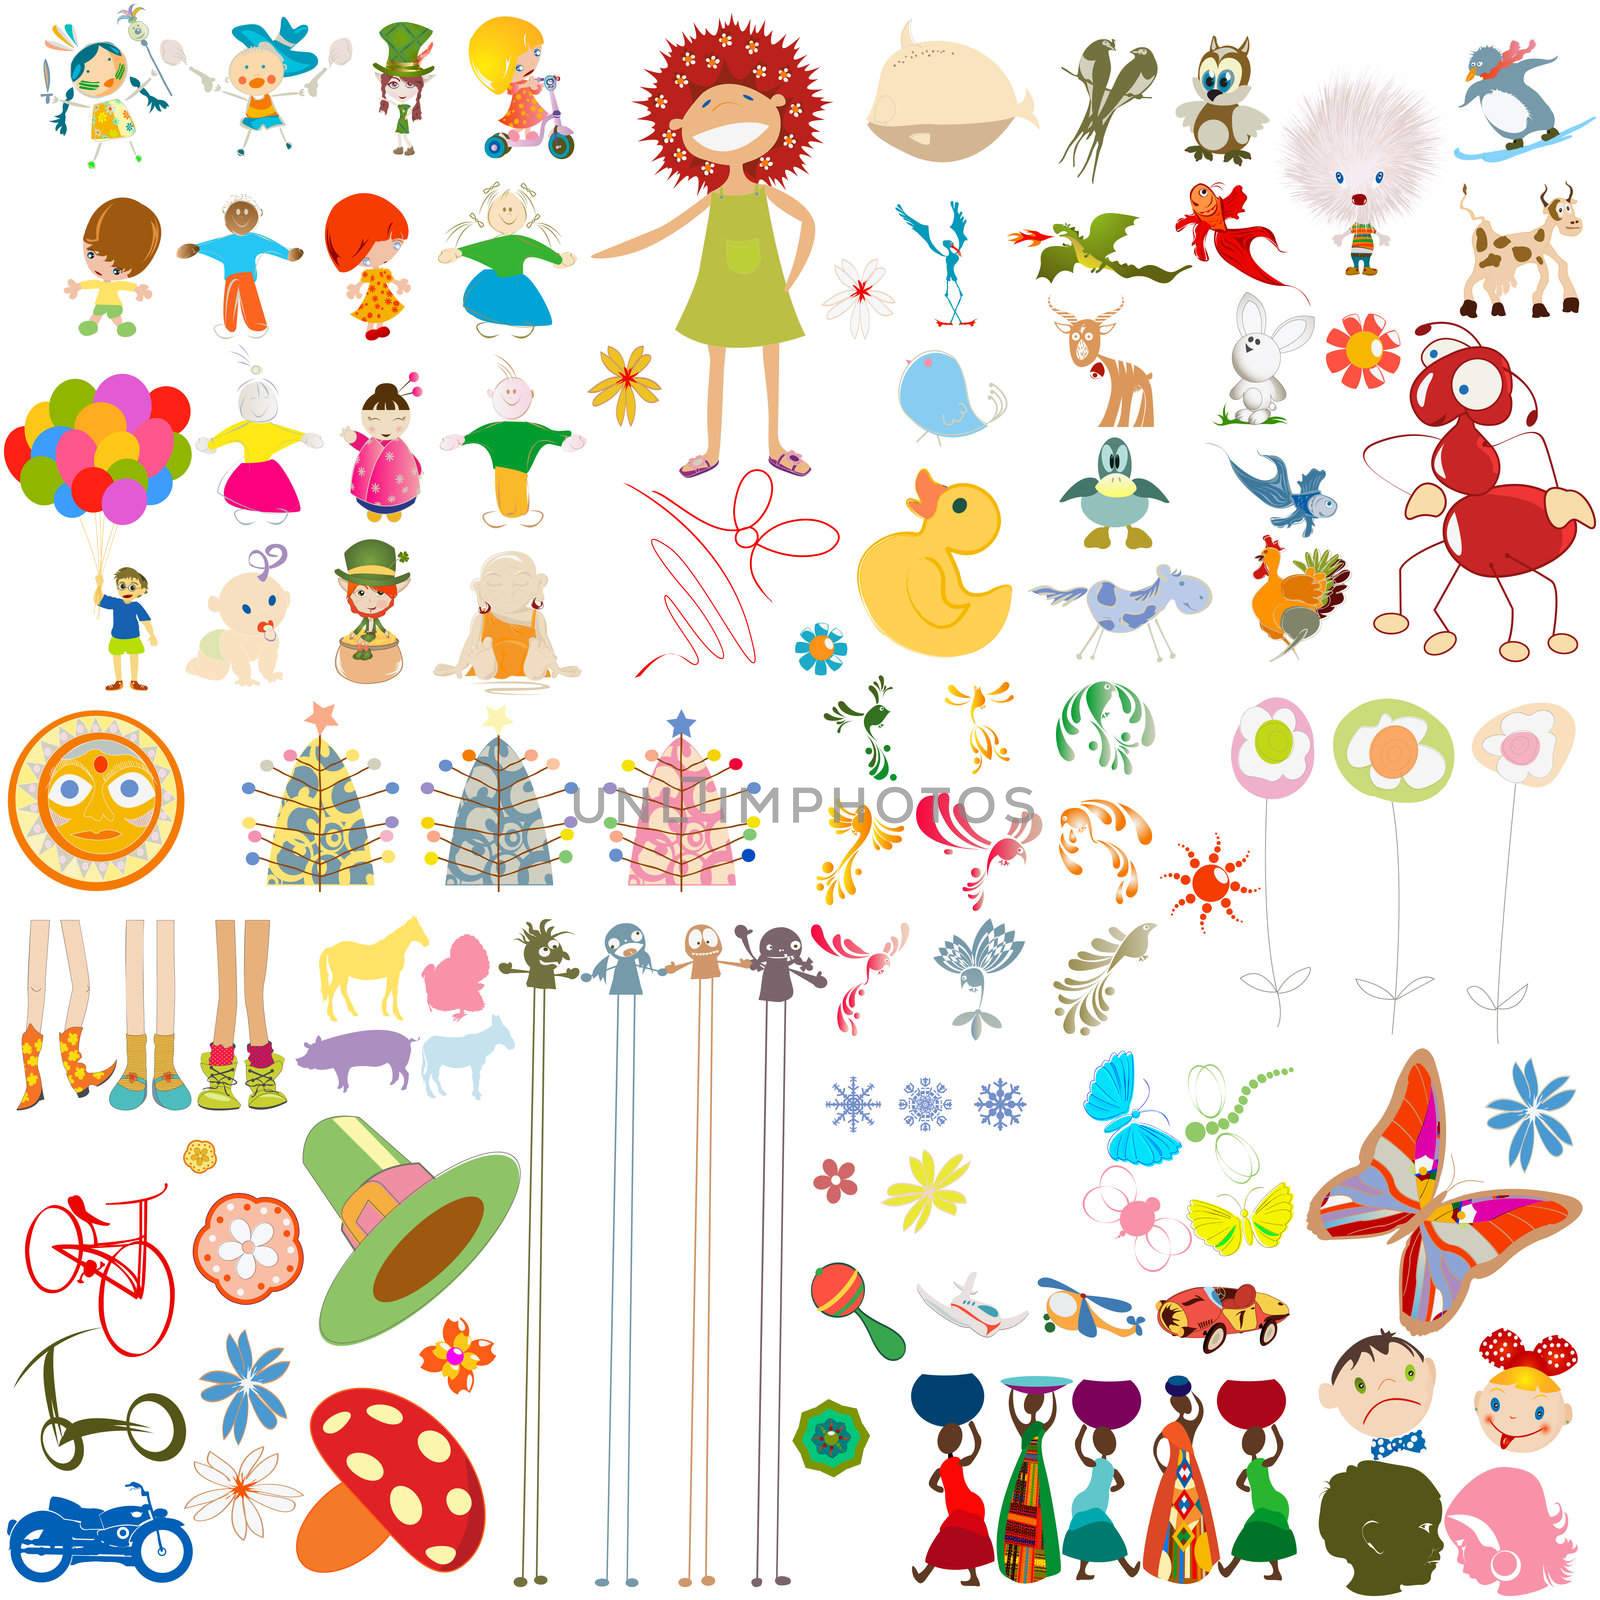 Decorative cartoon characters collection, design elements over white background